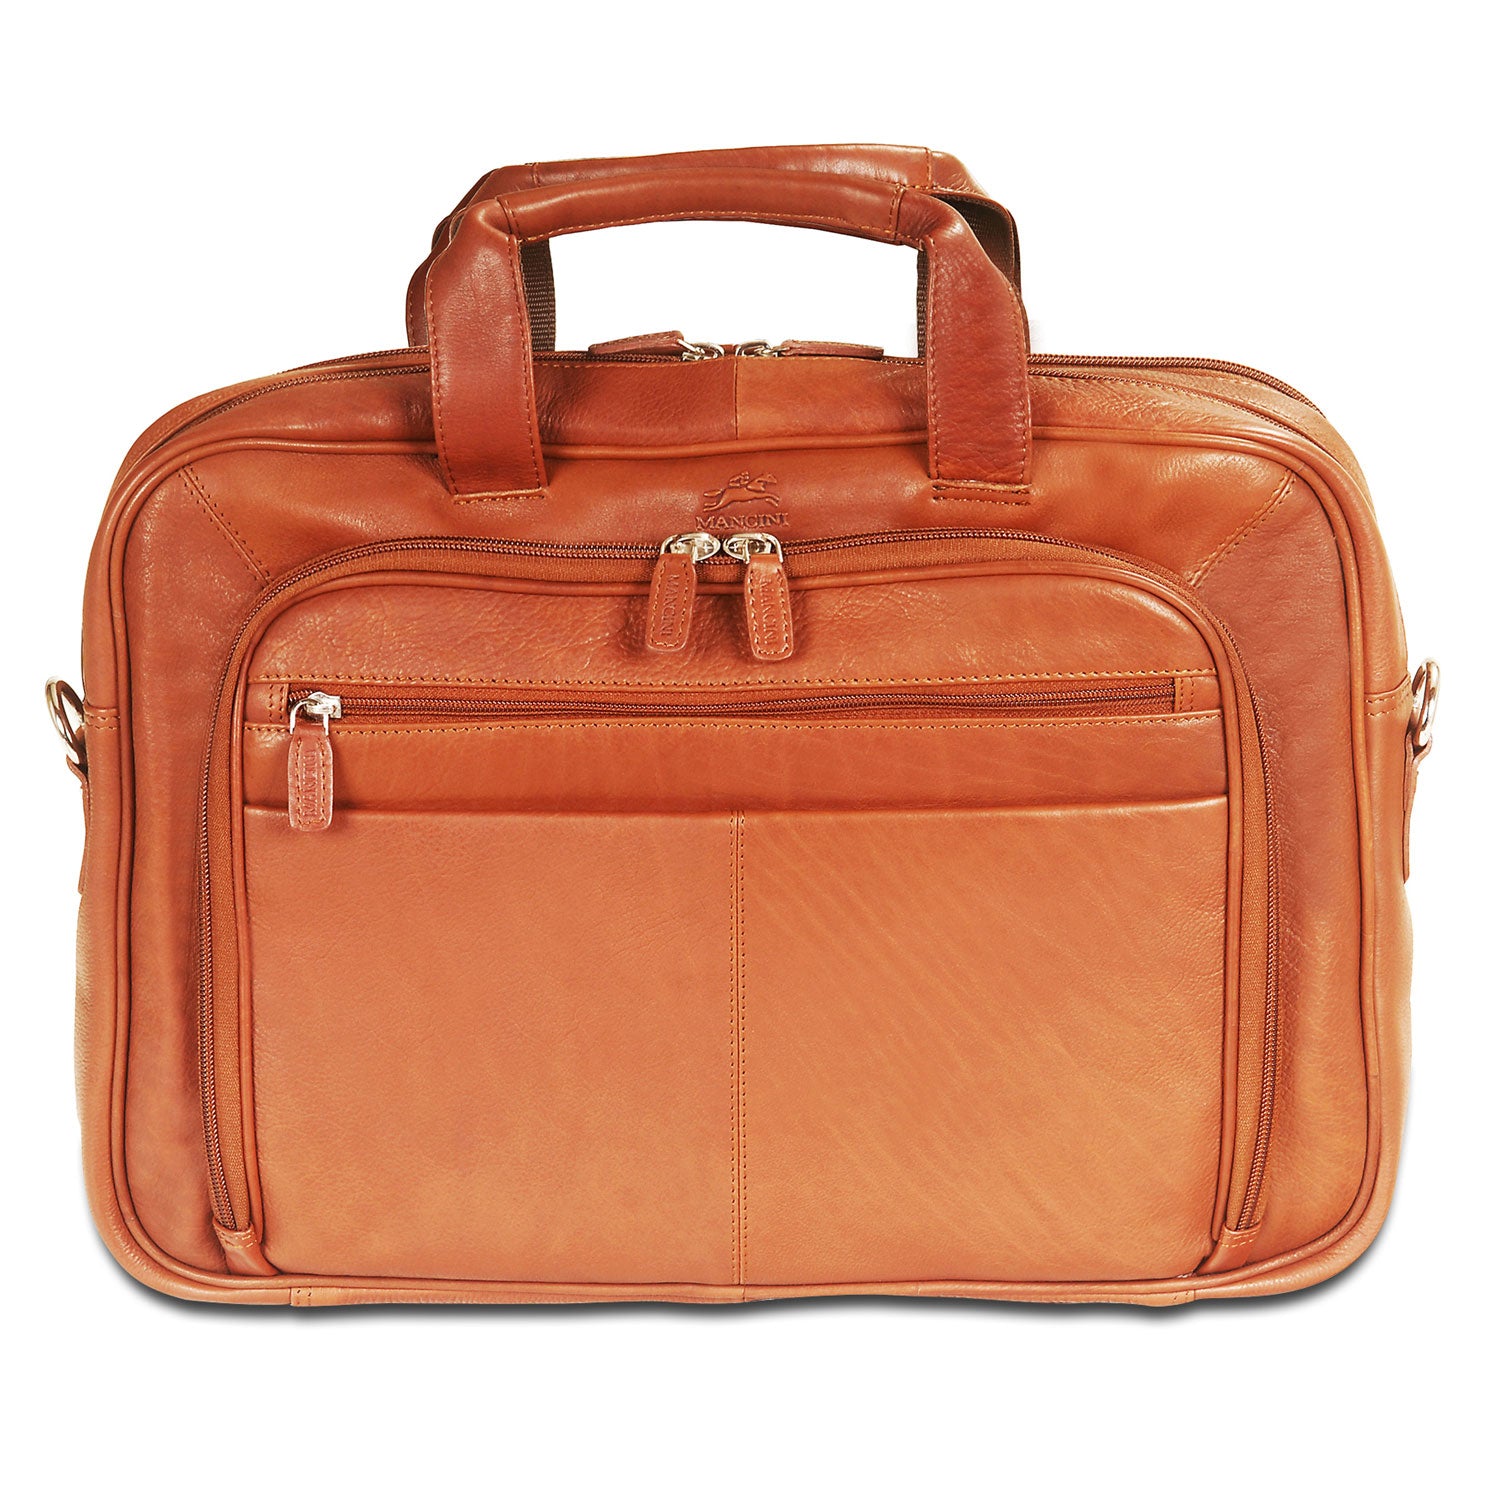 Mancini Leather Zippered Double Compartment for 15.6" Laptop / Tablet, 15.75" x 4.25" x 11.5", Cognac